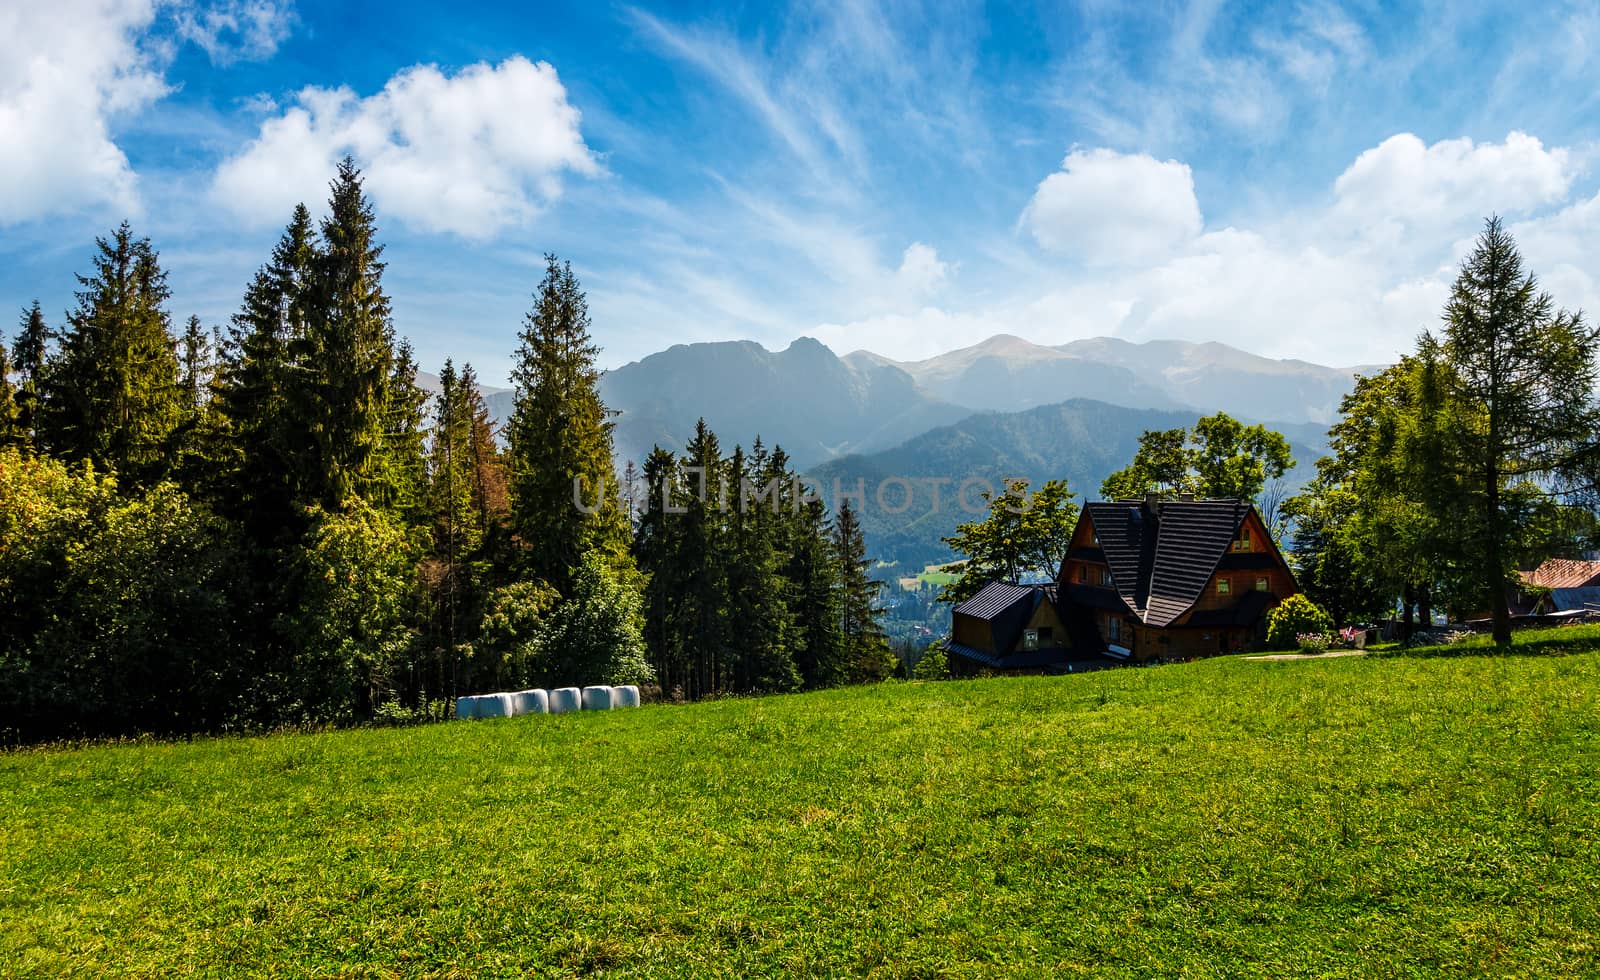 beautiful landscape of Tatra Mountains. location Zakopane village, Poland. lovely scenery with forest on a grassy meadow and a ridge under the gorgeous sky in the distance